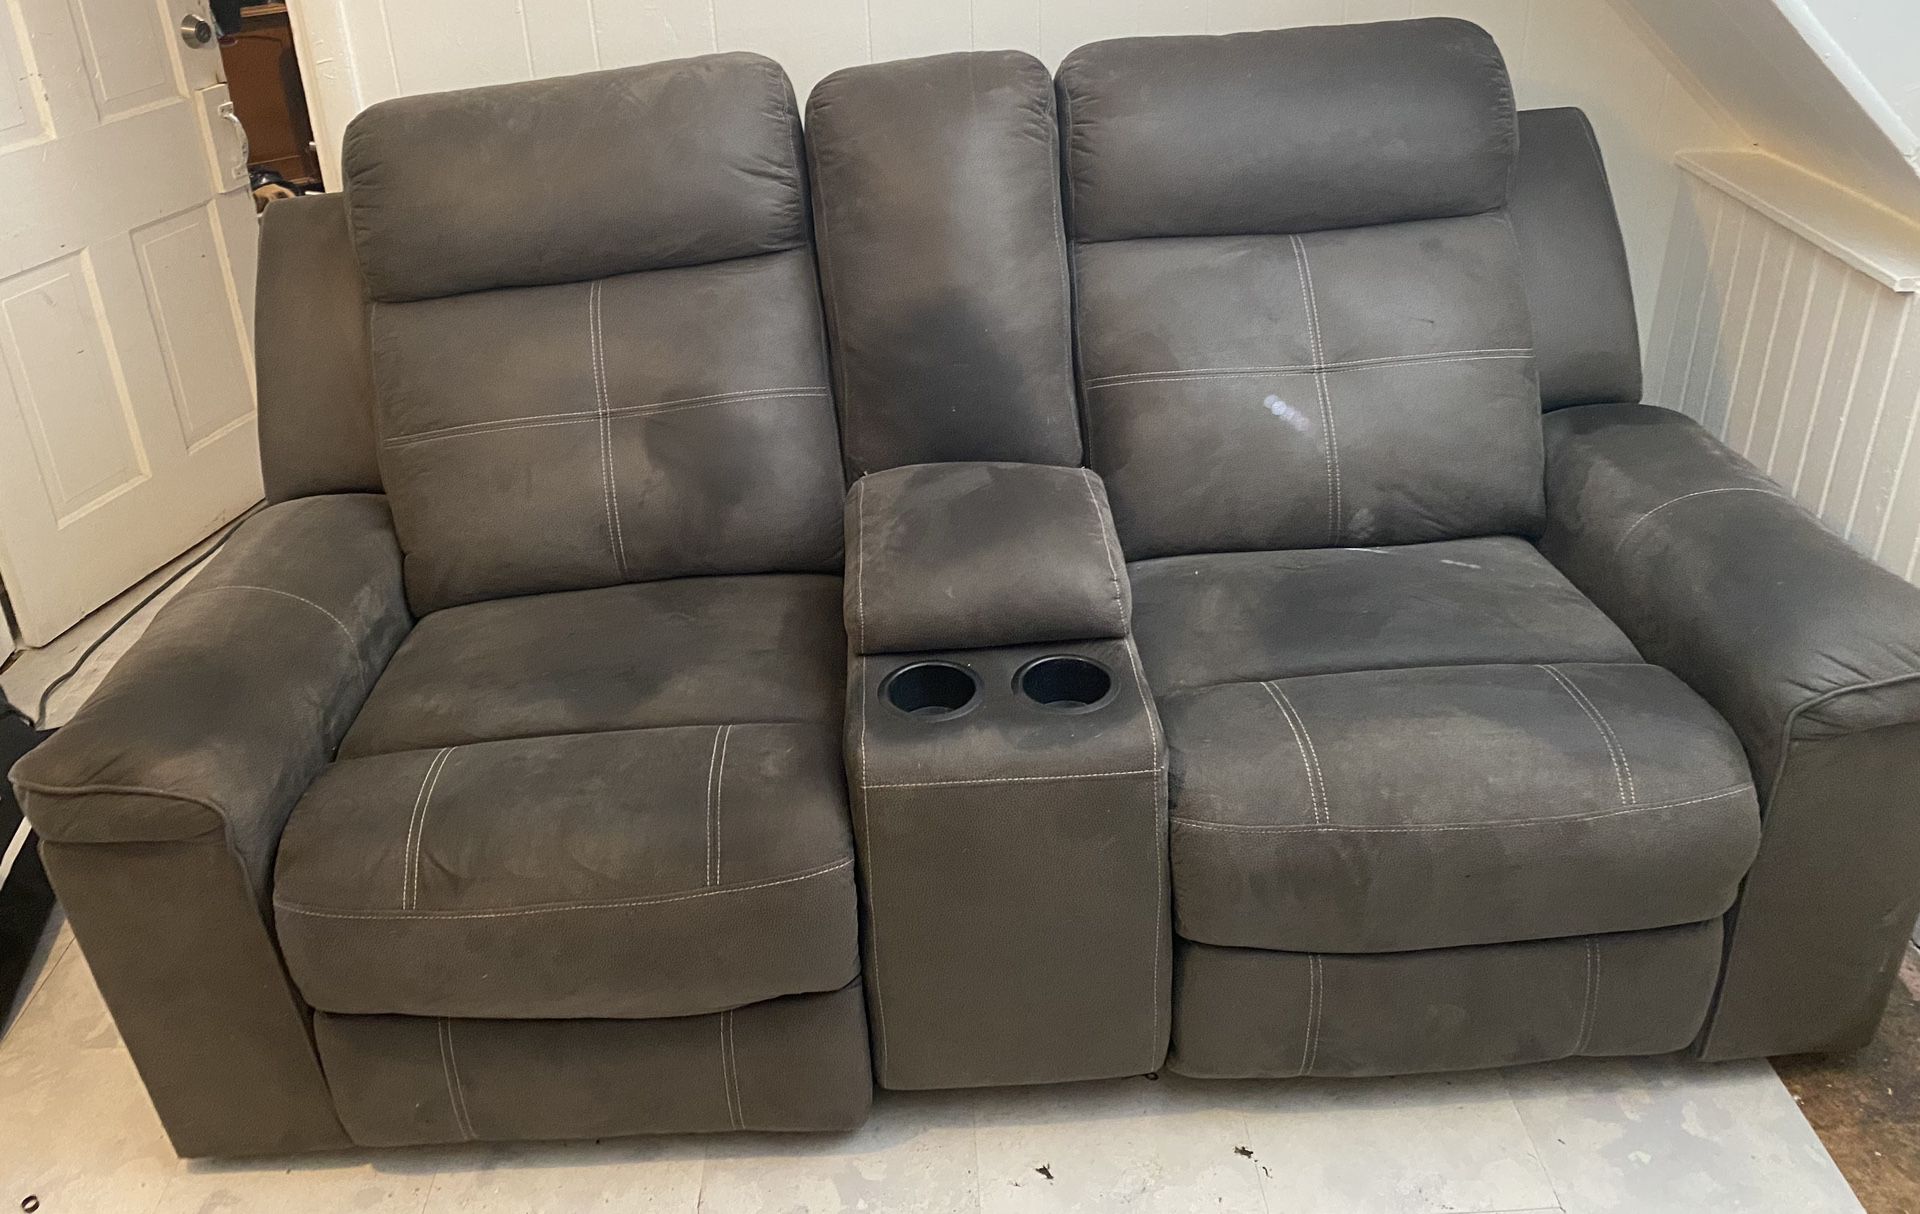 loveseat and matching chair